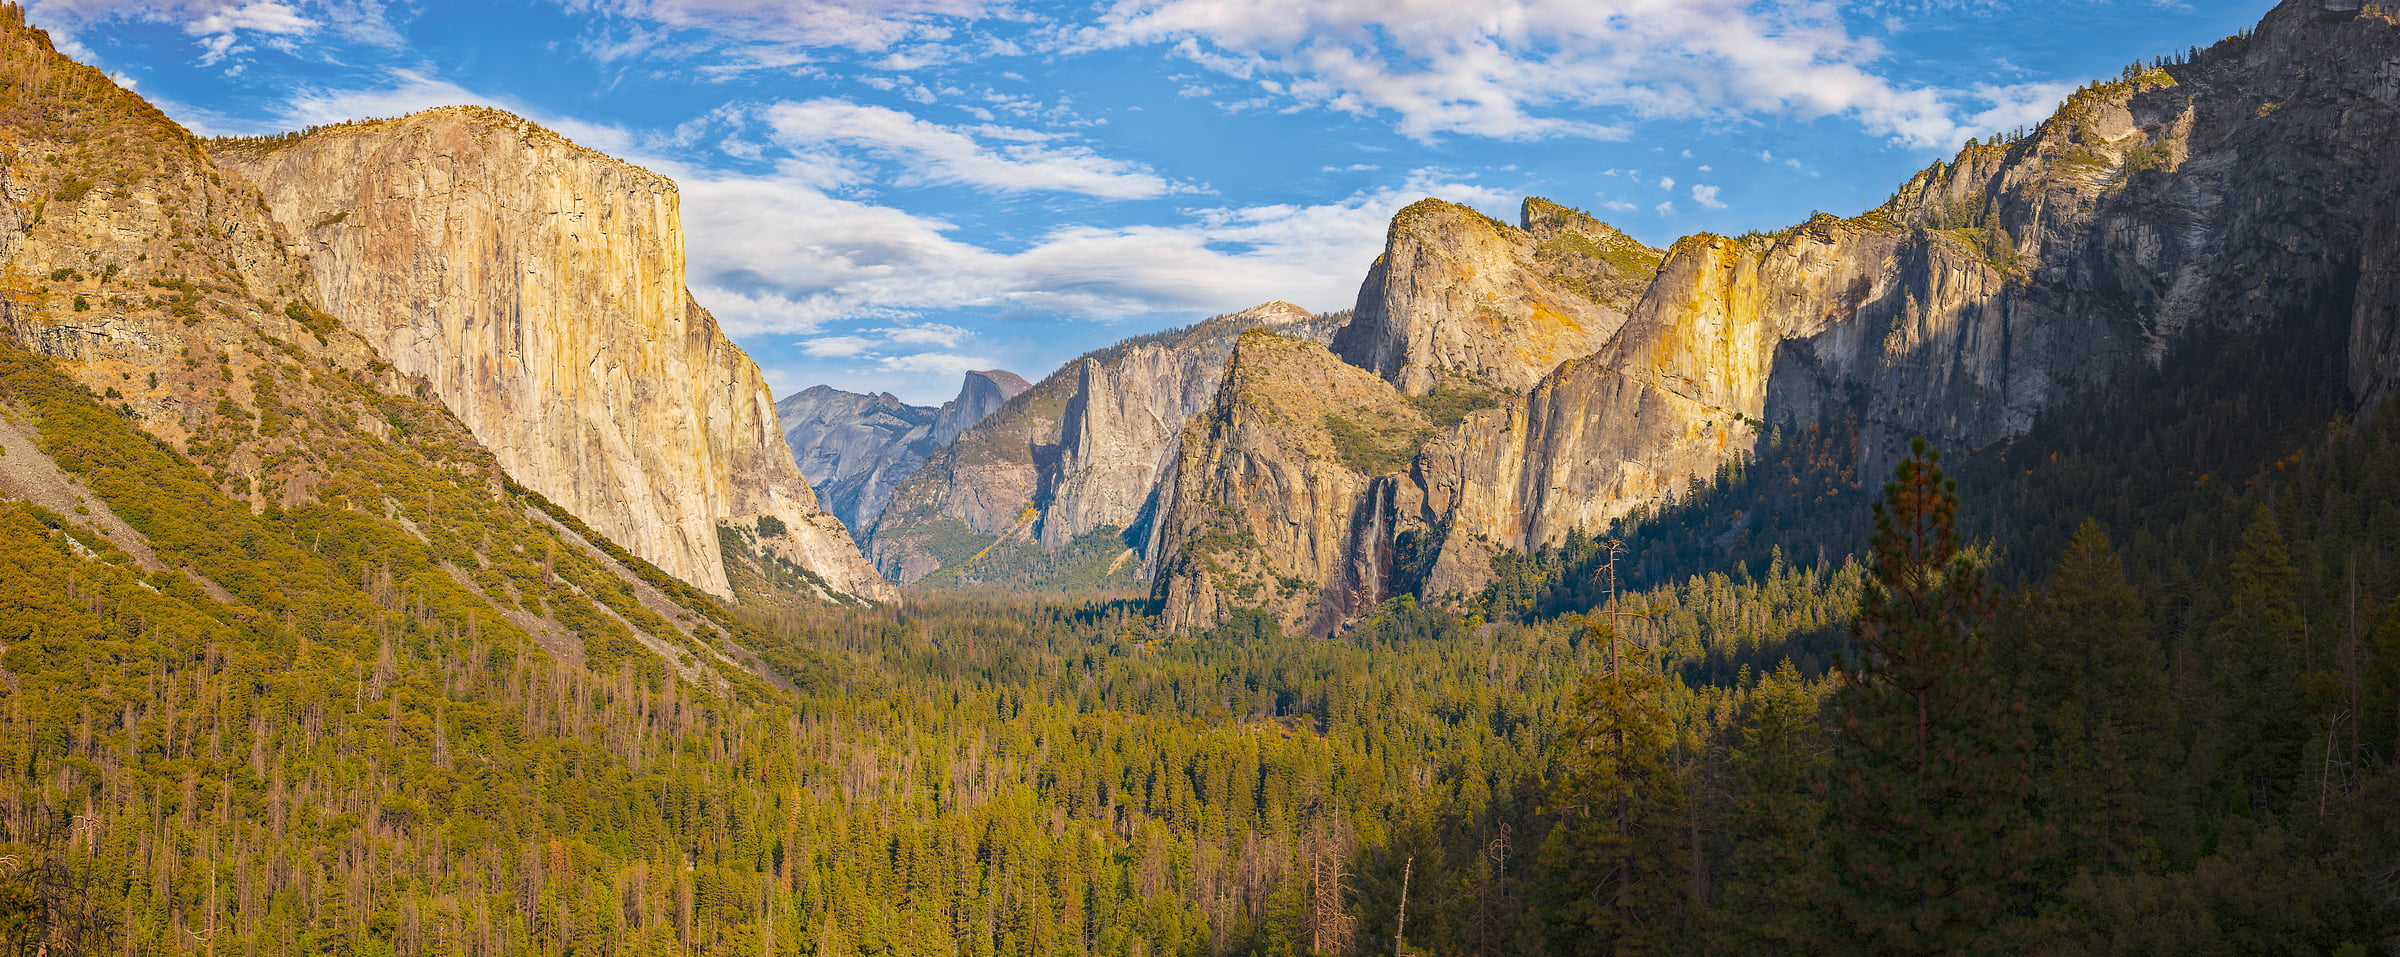 3,152 megapixels! A very high resolution, large-format VAST photo print of a landscape in Yosemite; photograph created by John Freeman at Tunnel View Overlook in Yosemite National Park, CA.